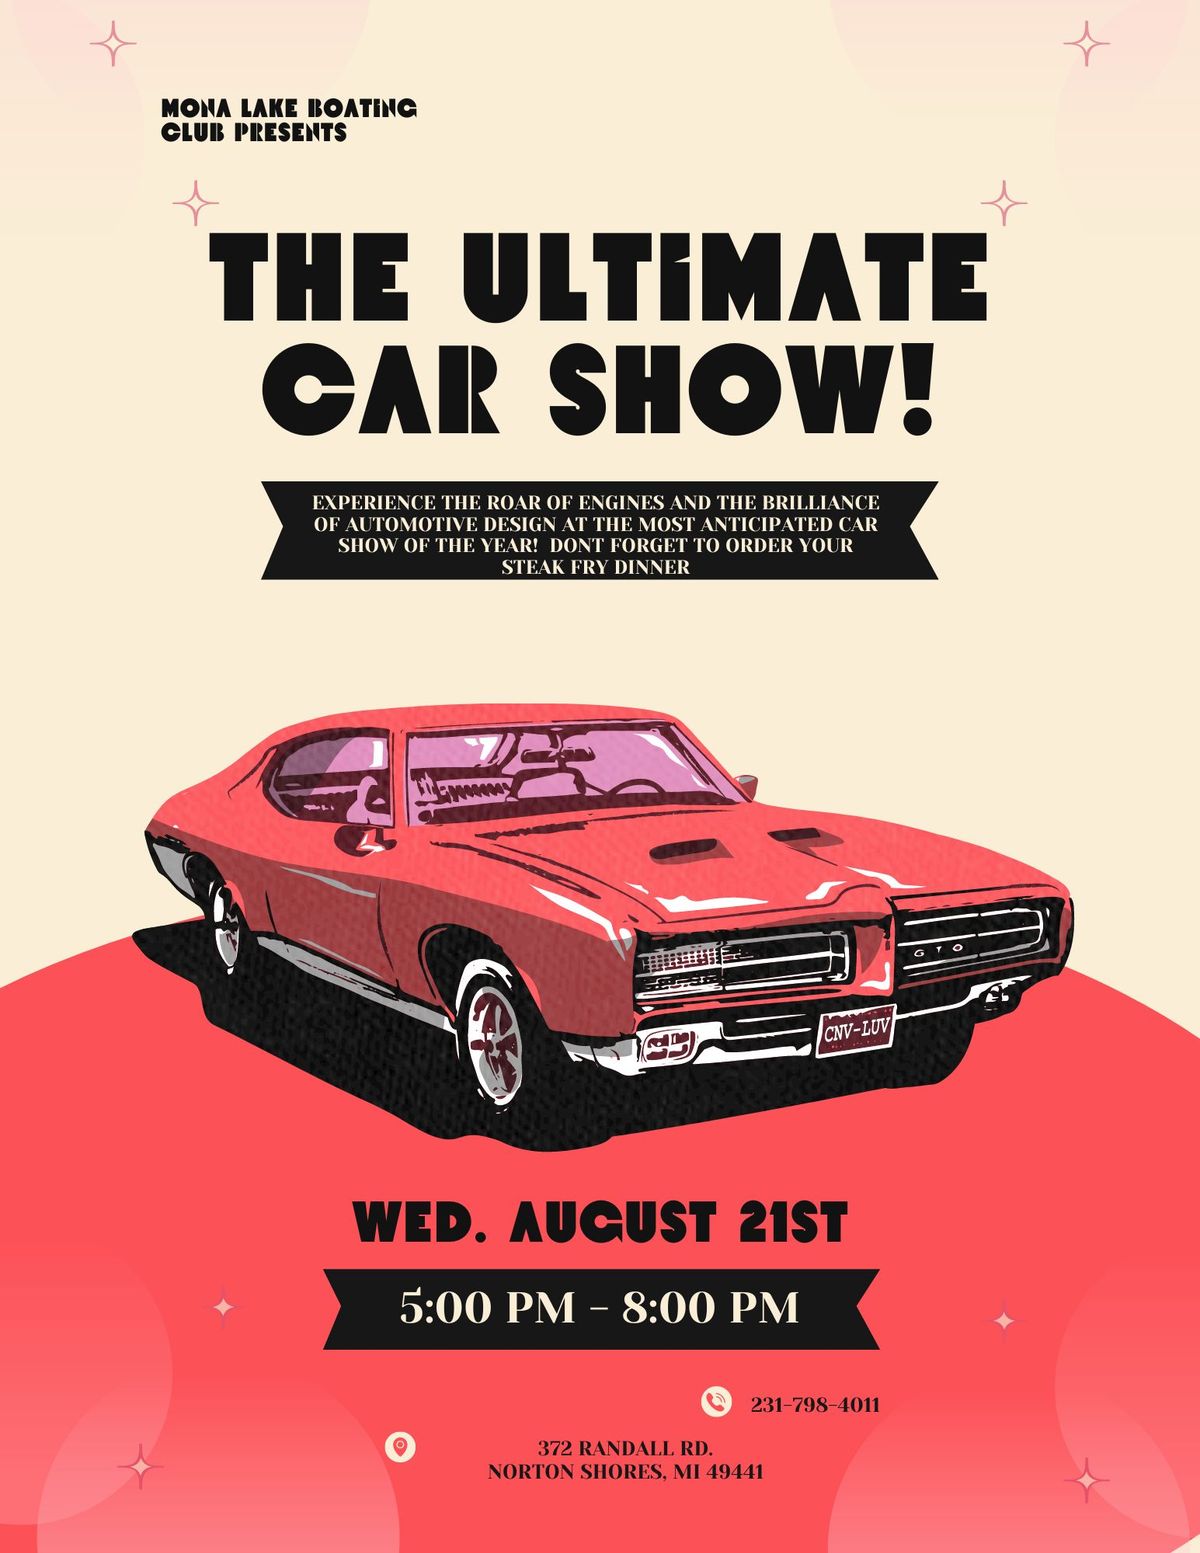 The Ultimate Car Show!